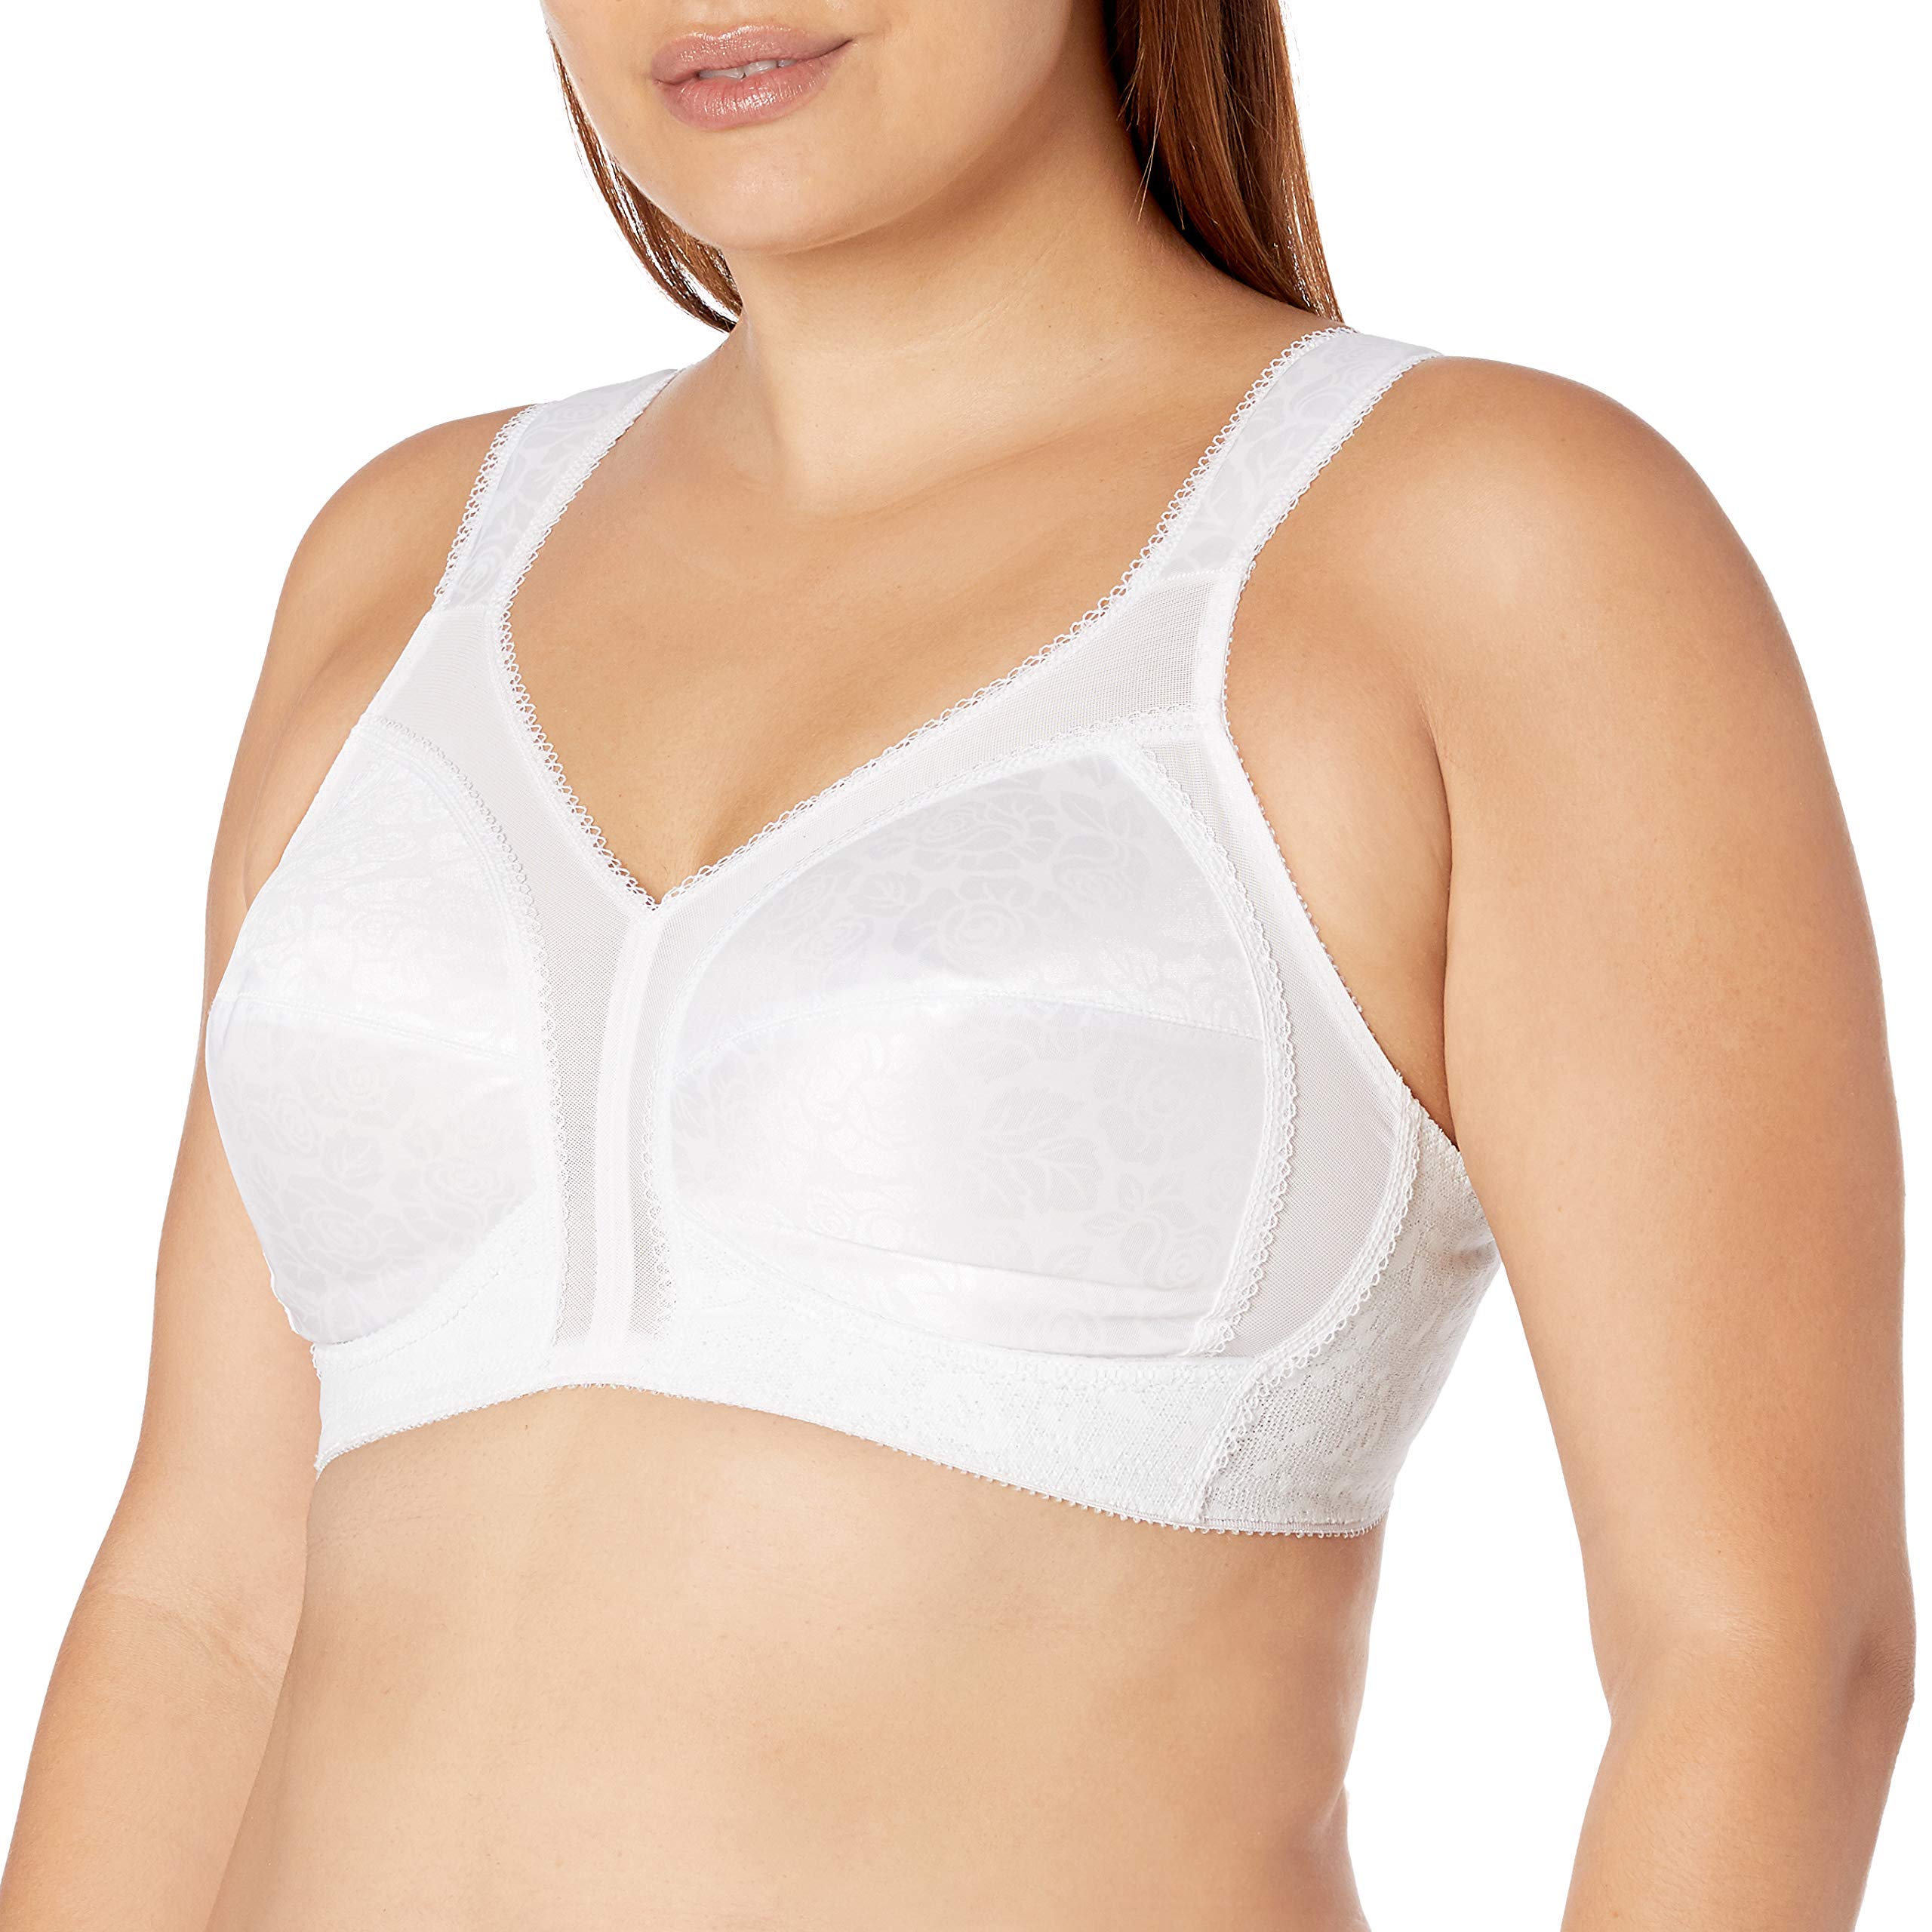 Playtex Women's 18 Hour Original Comfort Strap Full Coverage Bra Us4693, Available in Single and 2-Pack